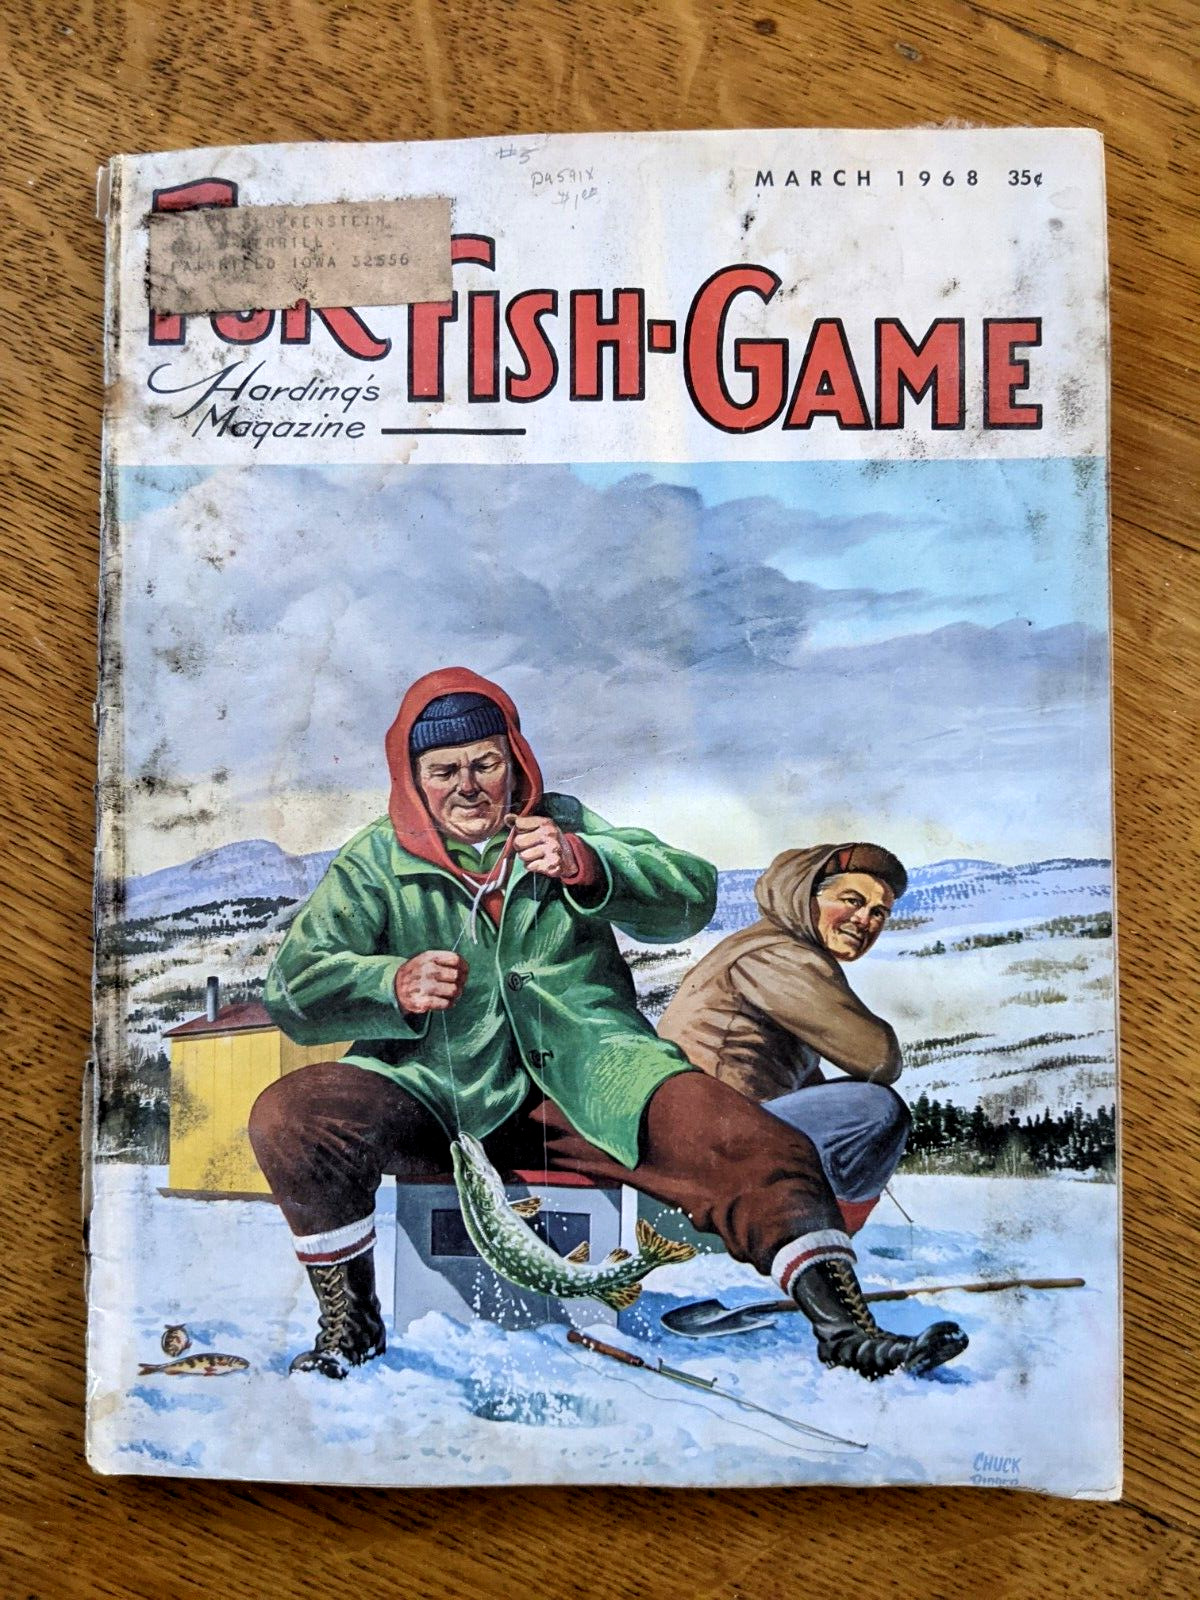 💎 Fur Fish-Game March 1968 Vintage Magazine - Low Grade - COMBINE SHIPPING 💎